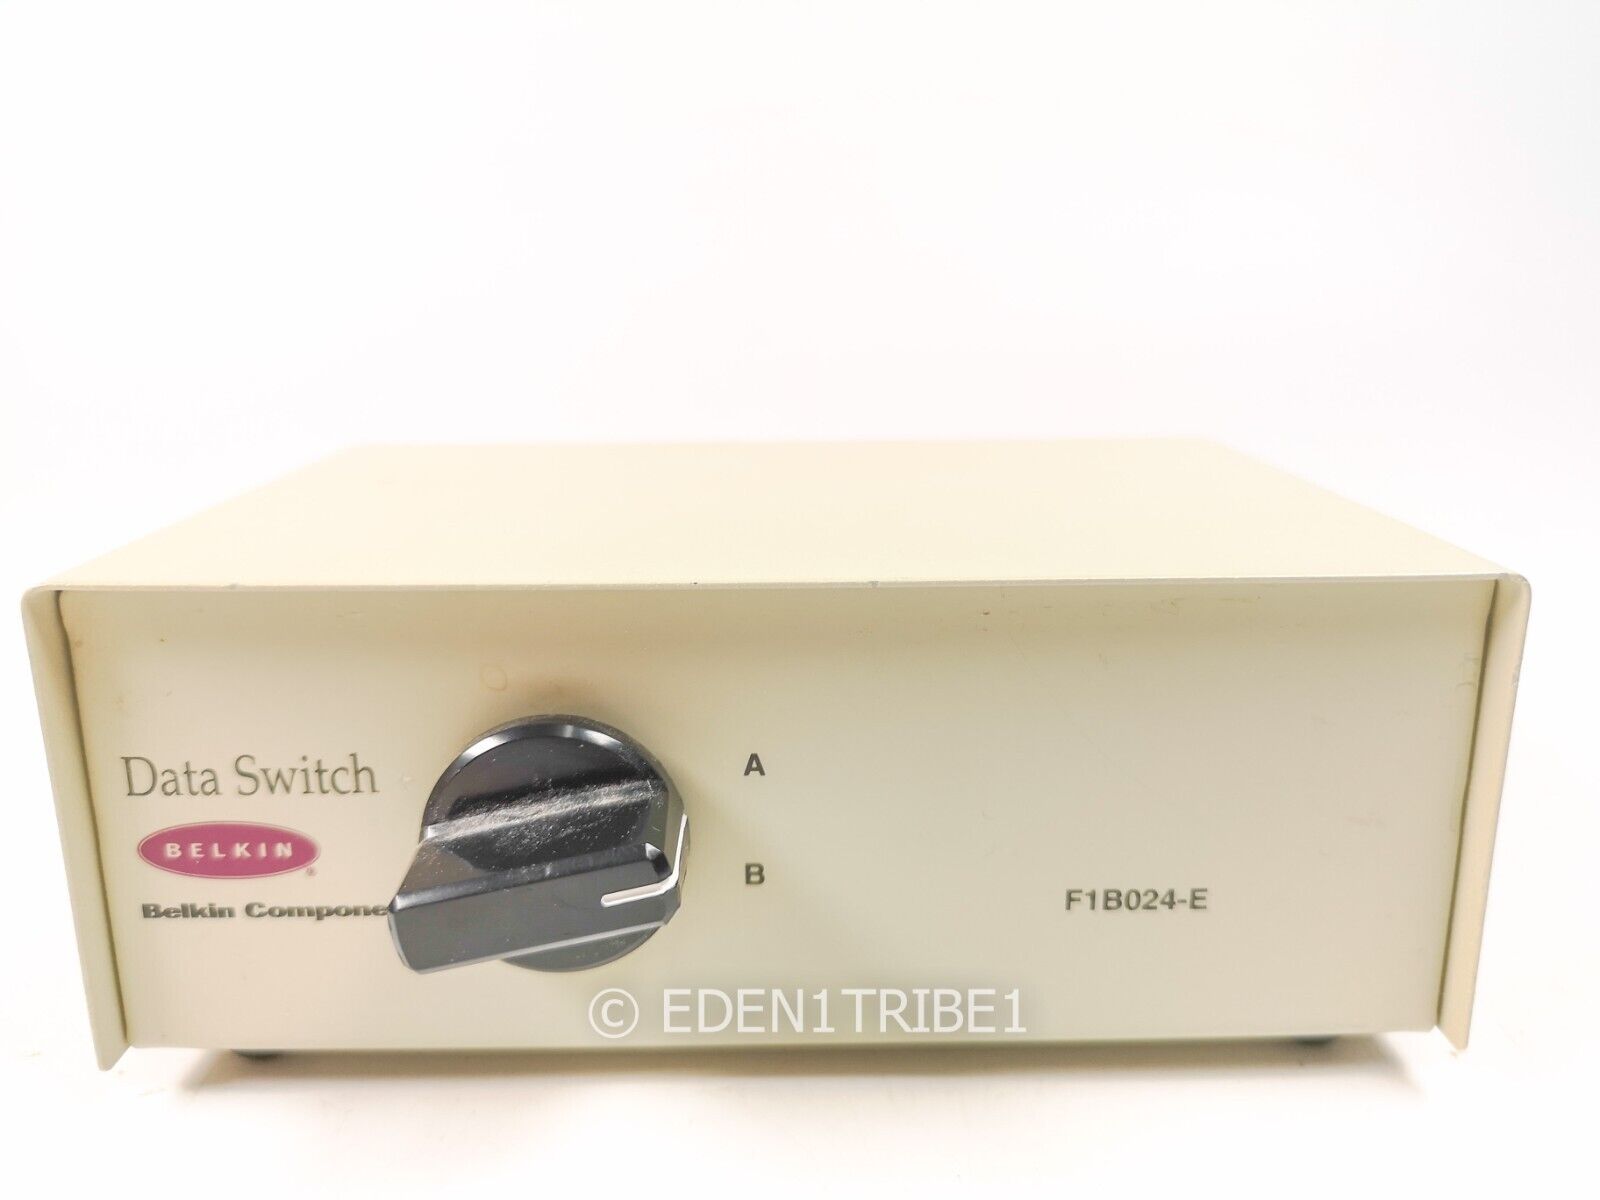 Belkin Data Switch F1B024-C, 2-Ports, Great Condition, Durable Metal Case